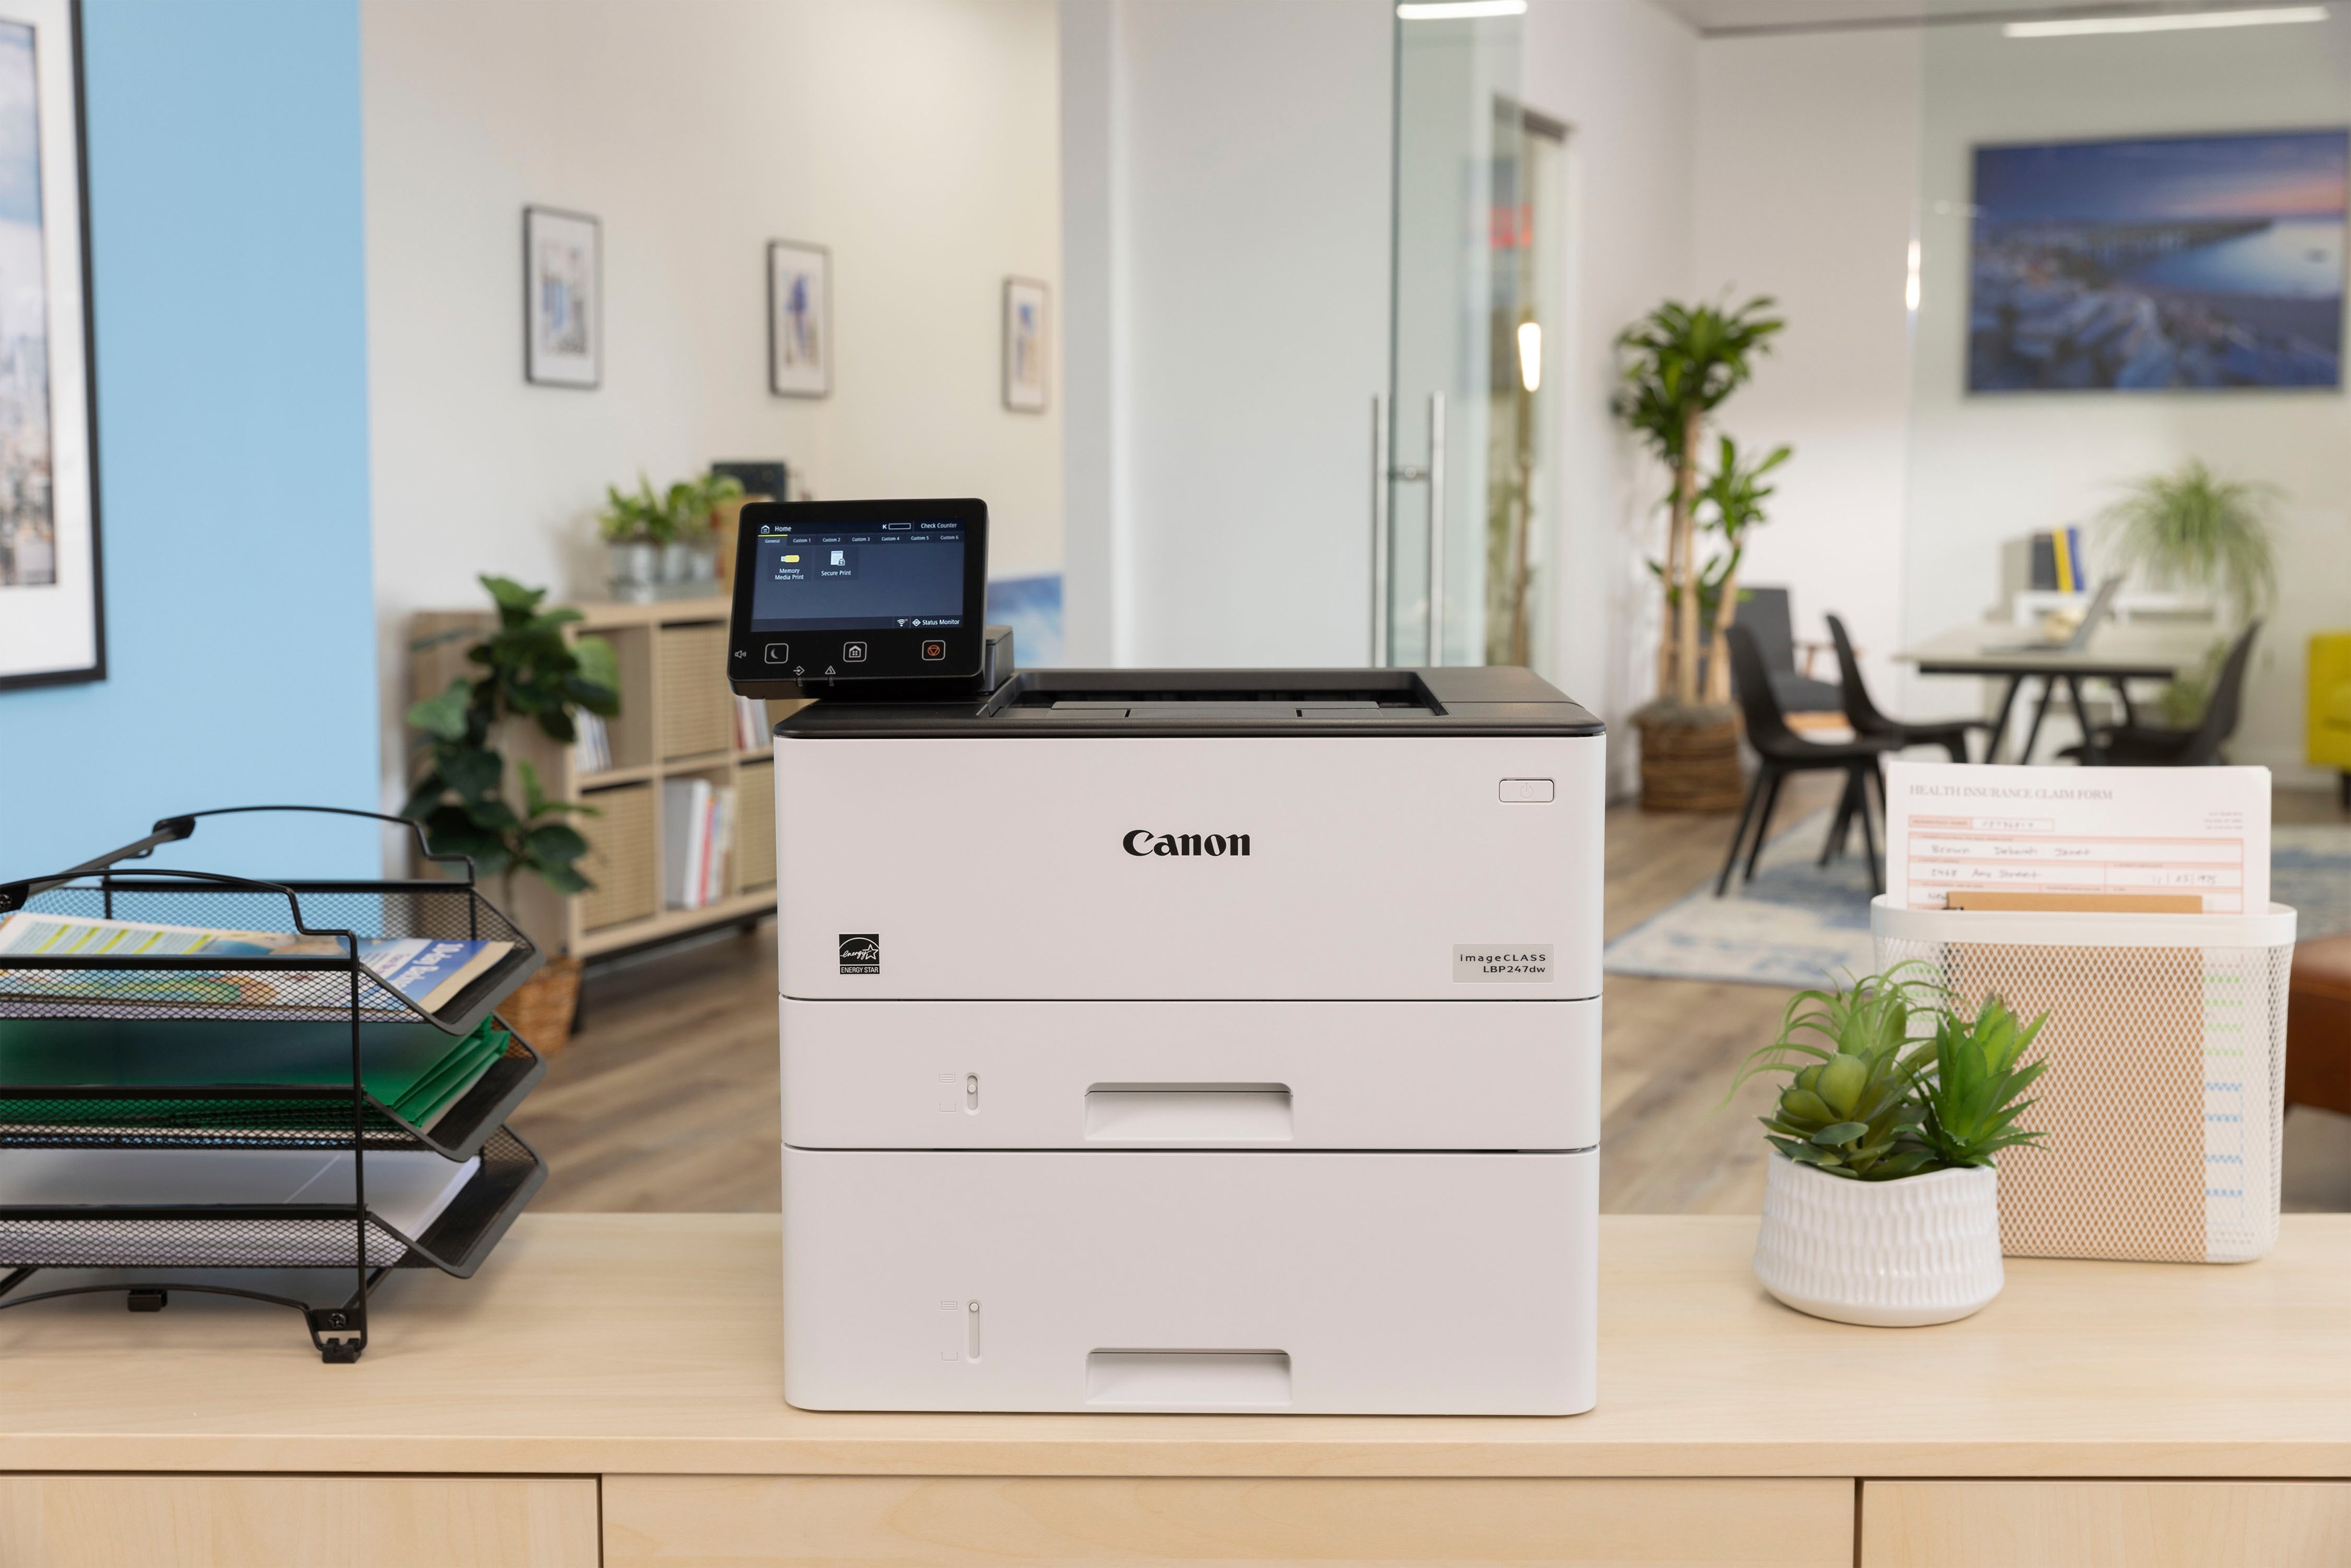 How to Install Canon imageCLASS LBP-Series Printer on GNU/Linux Distros - Featured